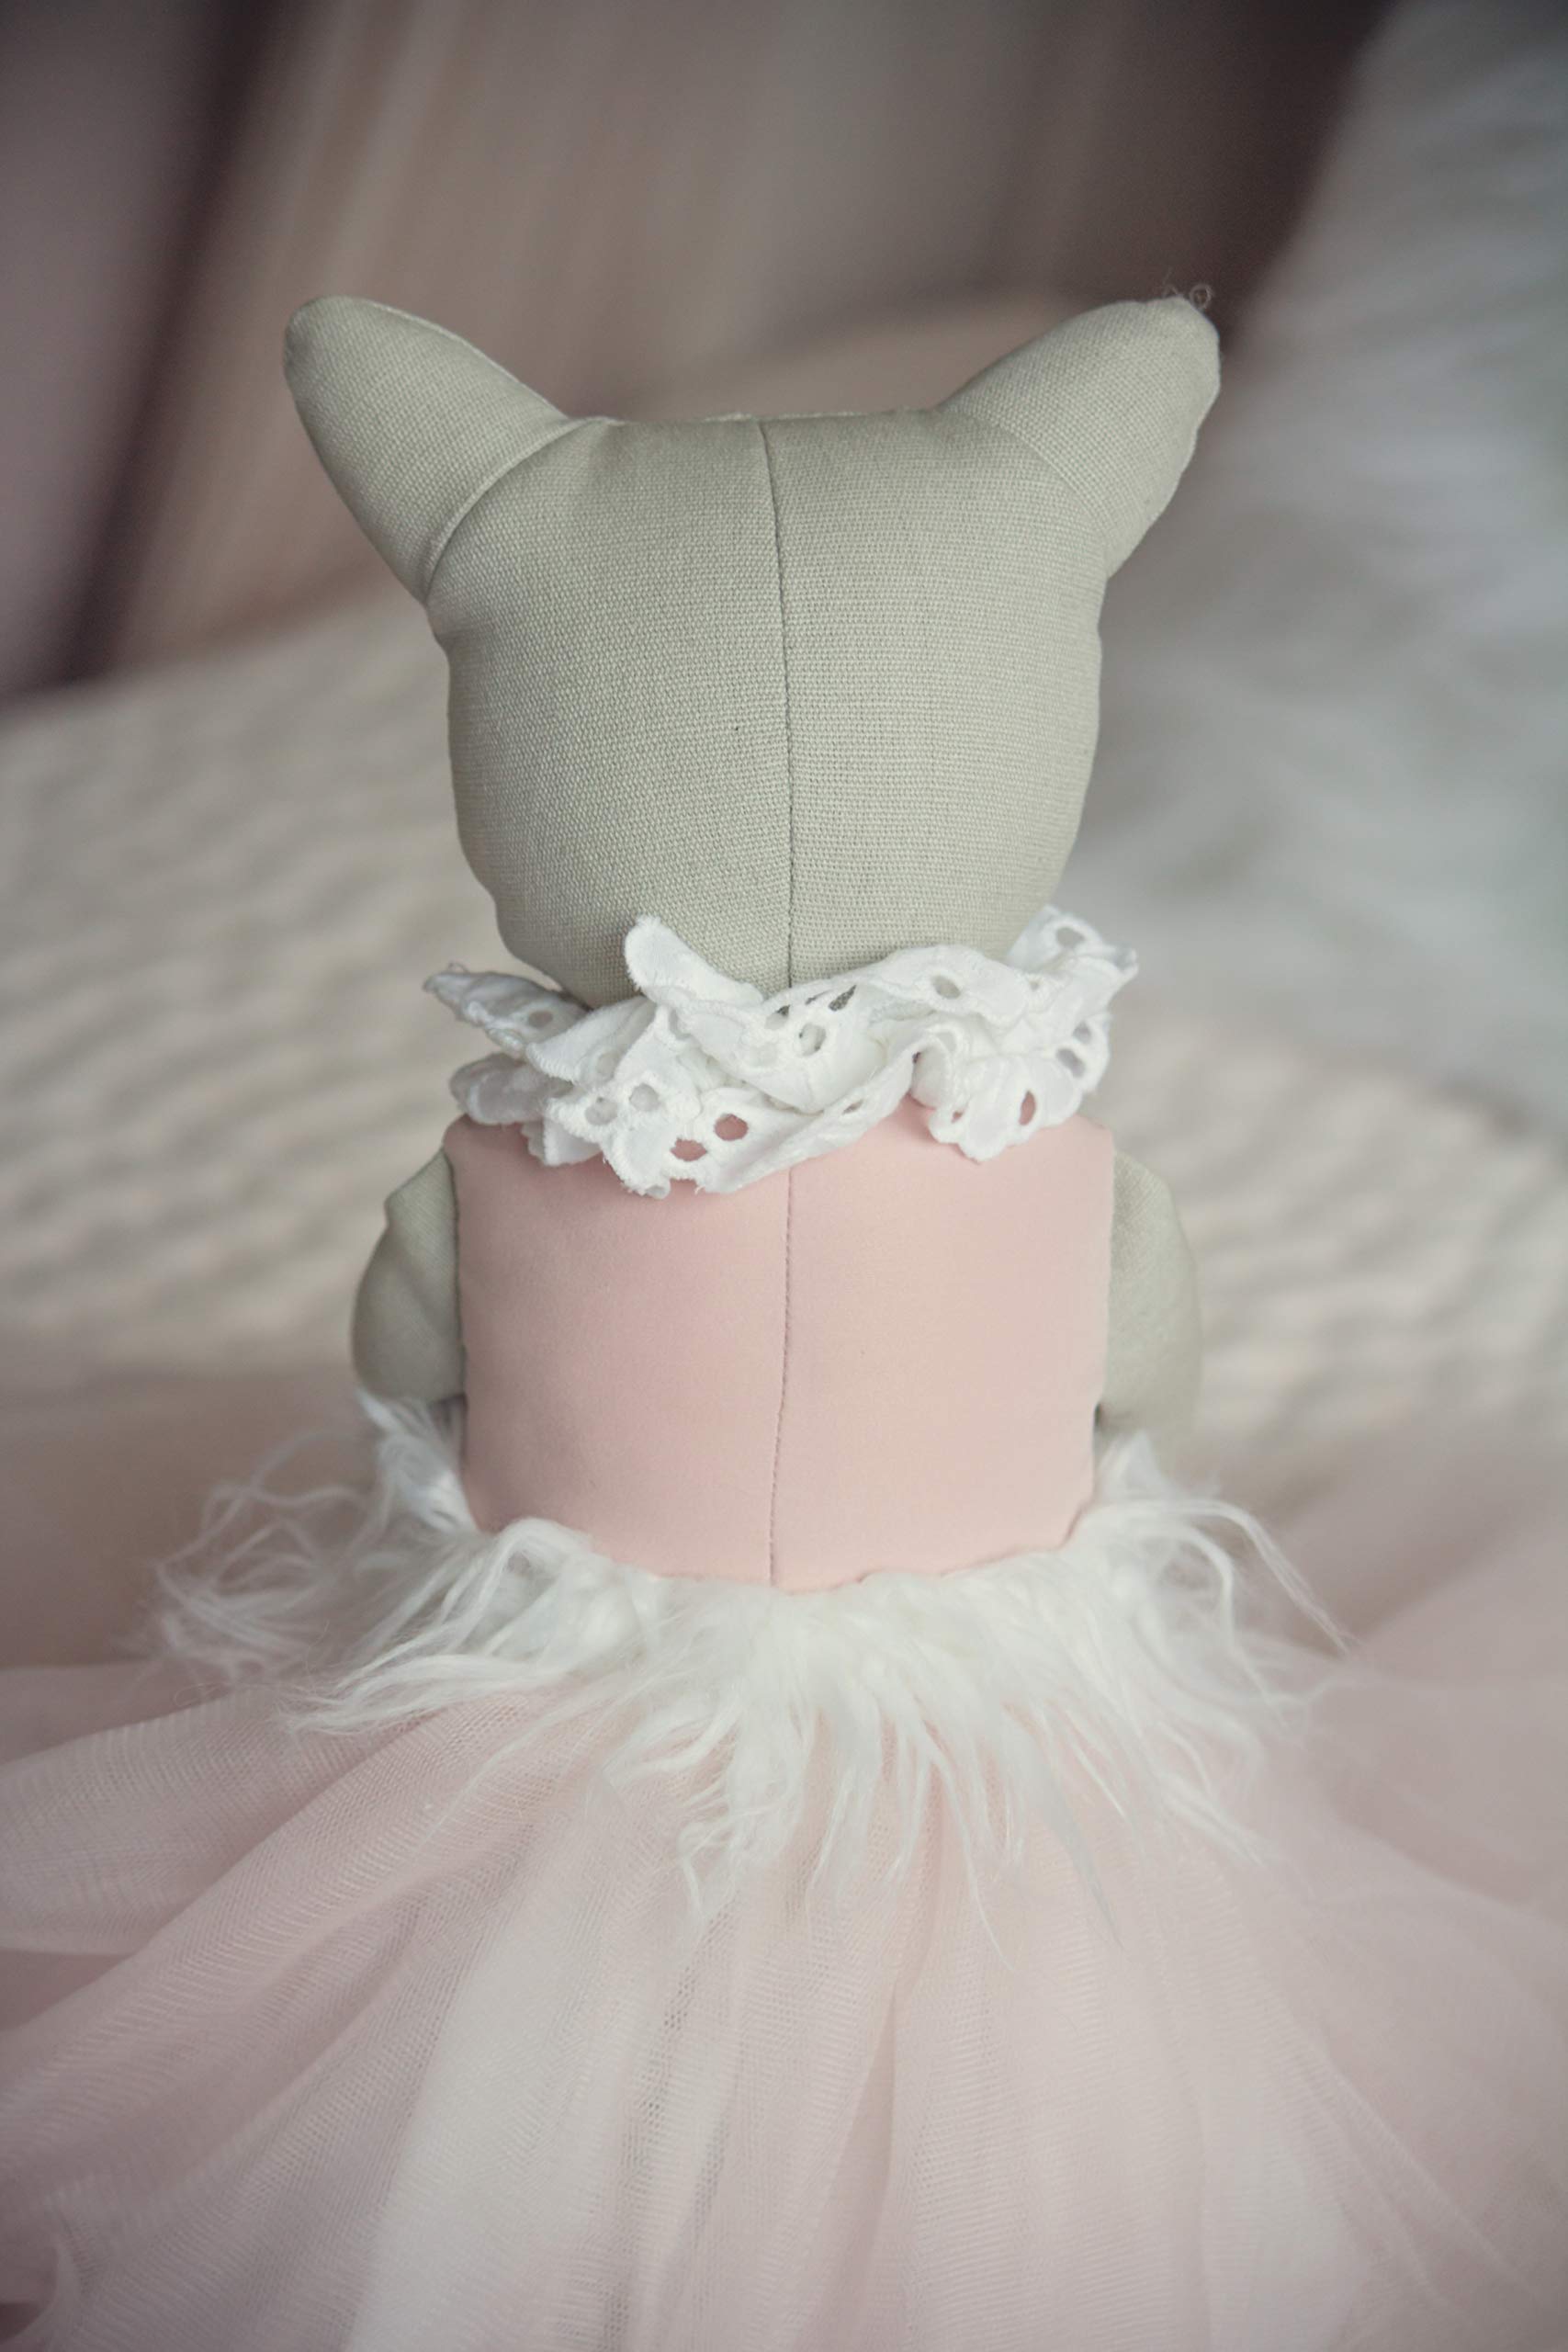 Inspired by Jewel Poppy The Cat - Handmade 24.8-Inch Plush Doll with Ballerina Tutu Outfit - Pretty Stuffed Toy Surprise Gift for a Little Princess Age 3+ - Soft Plushie for Hugs, Cuddle and Comfort